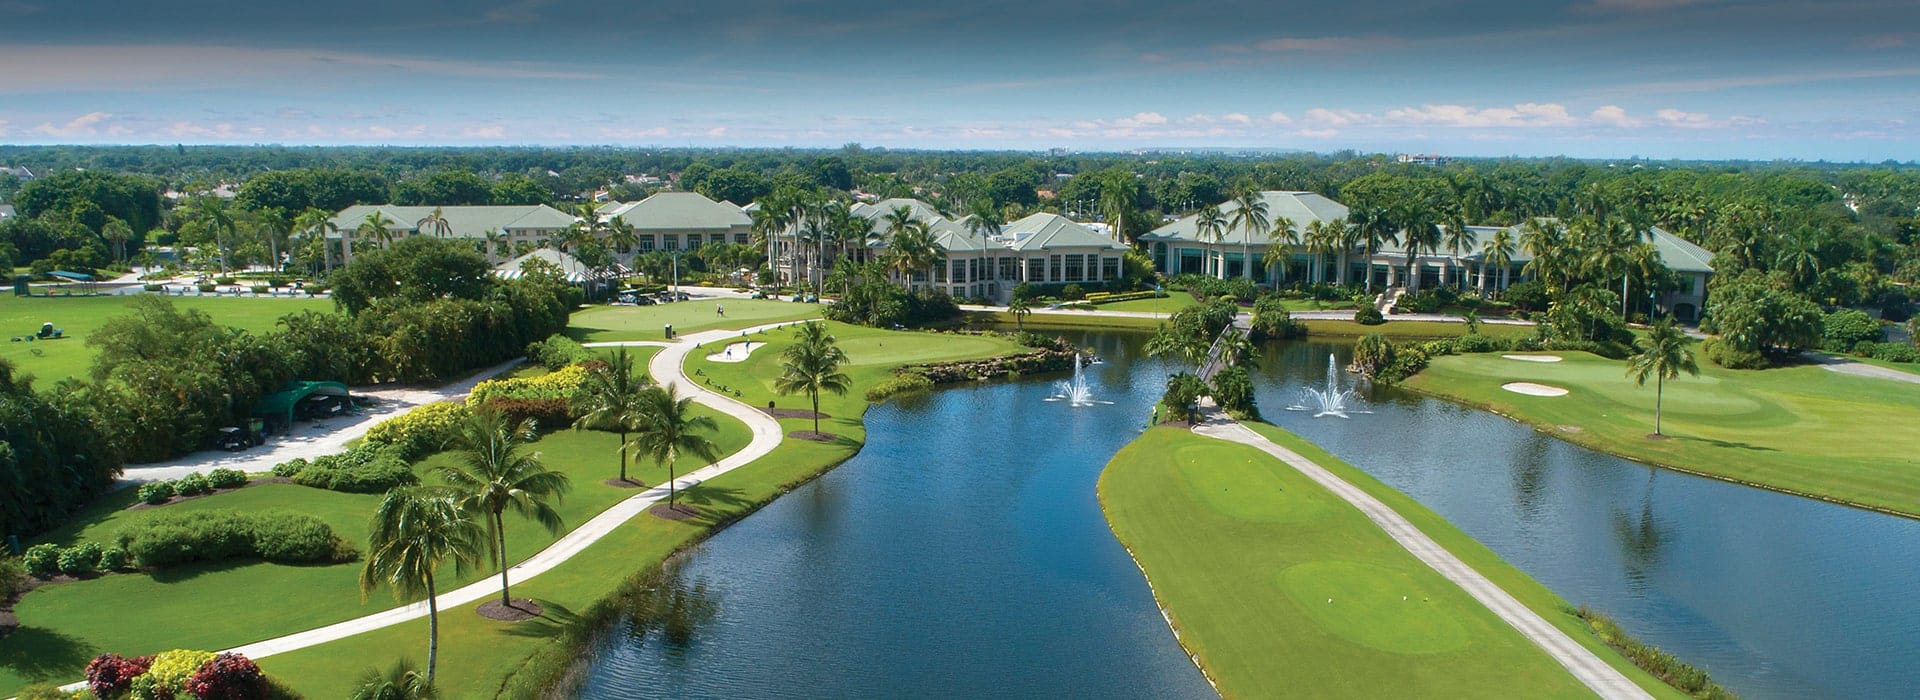 Boca West Country Club golf hole with tee boxes flanked by water on both sides